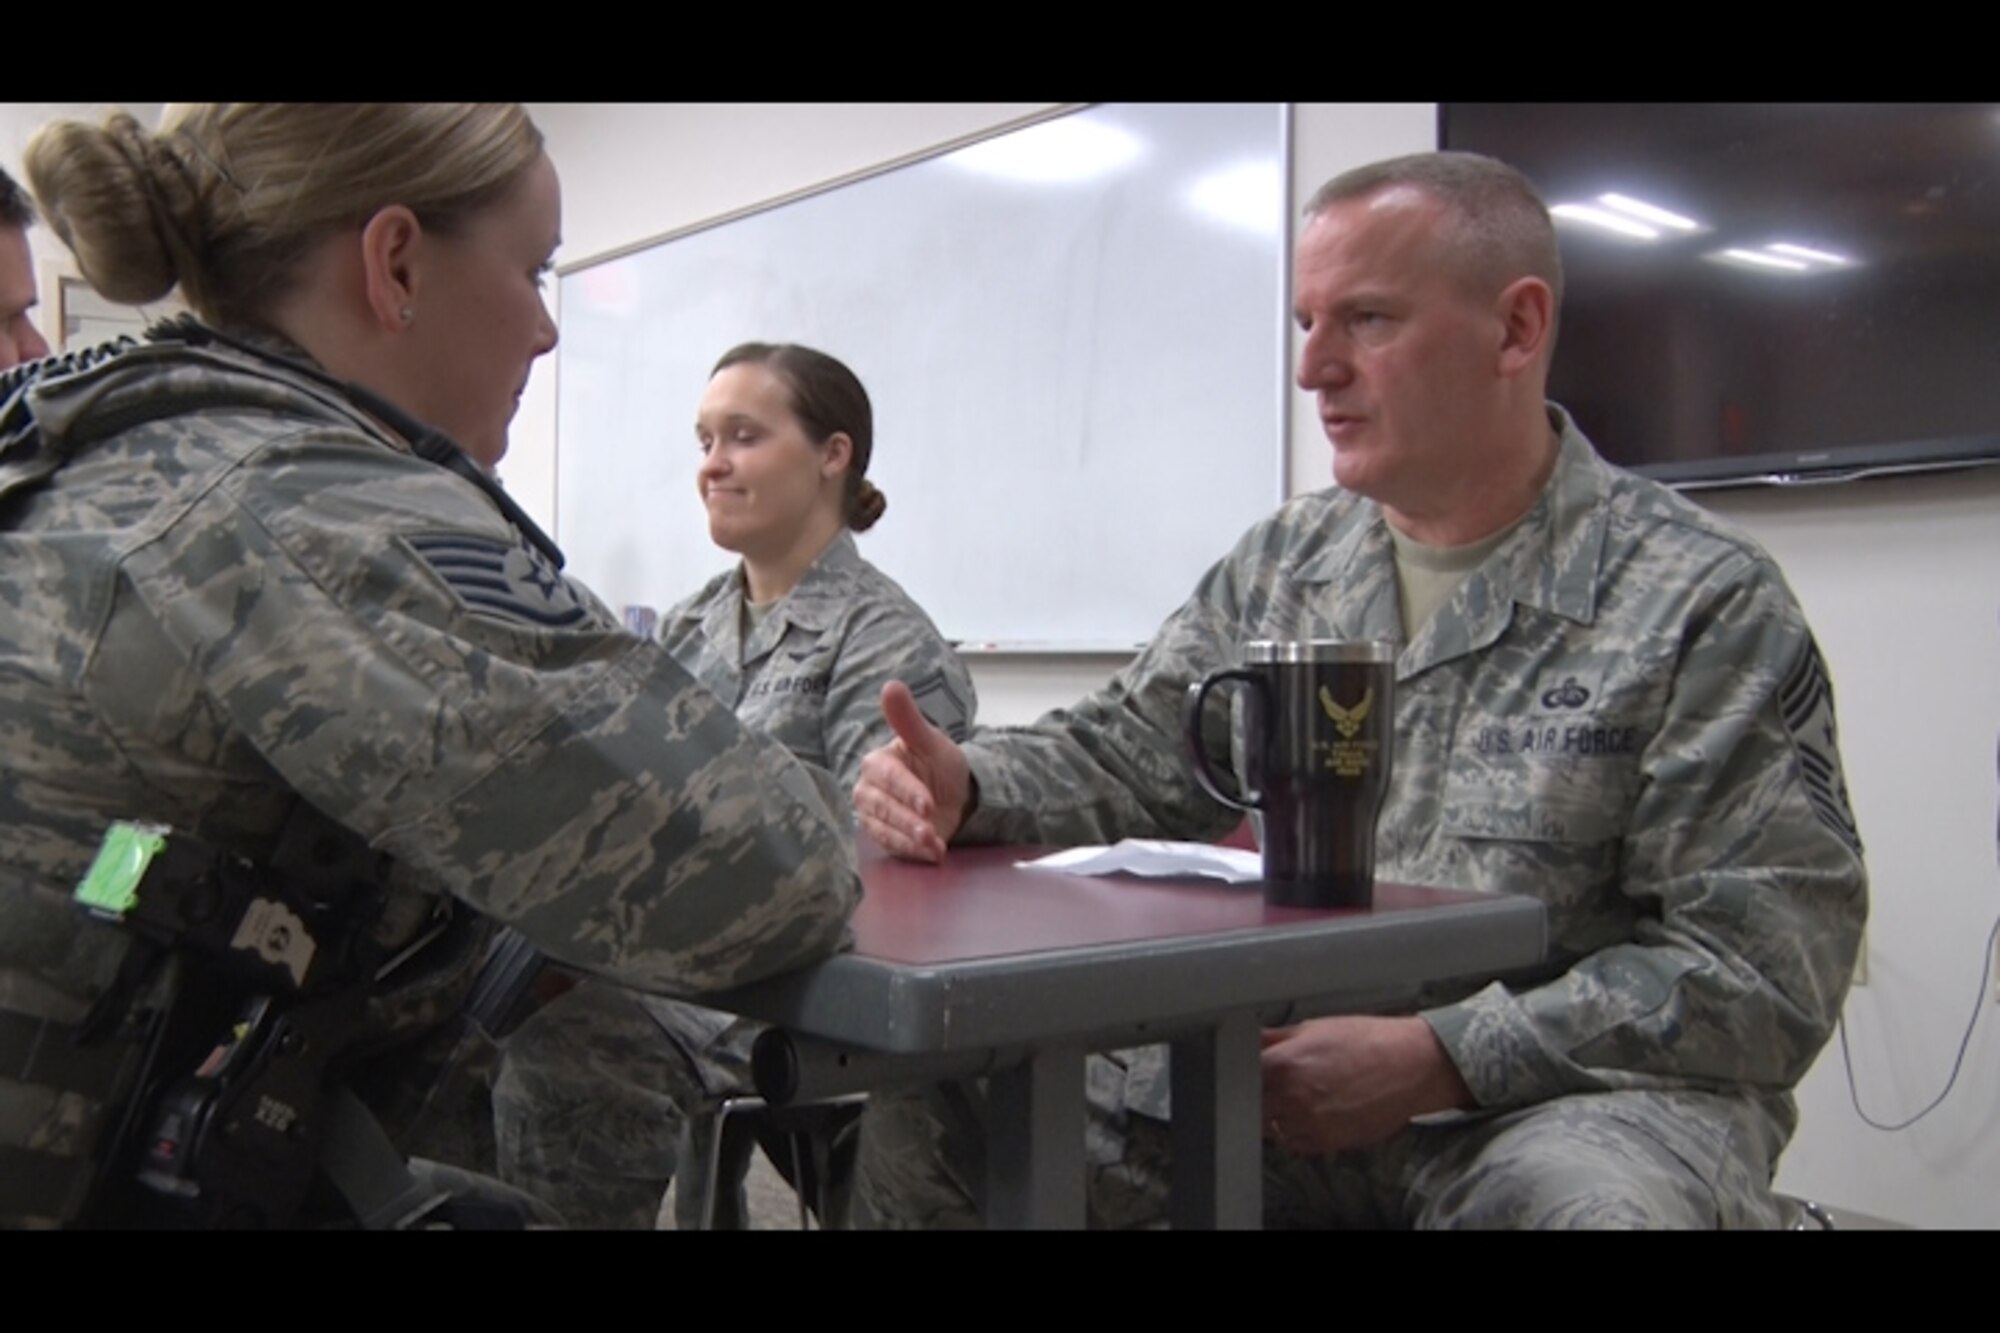 Staff Sgt. Kelsey Hannafin, 157th Security Forces Squadron member, talks with Chief Master Sgt. James Lawrence, 157th Air Refueling Wing Command Chief Master Sergeant, during the speed- mentoring event at Pease Air National Guard Base, N.H. Feb. 5. The event was created as an opportunity for NCOs to build professional relationships and aid their military career. (N.H. Air National Guard still from video by Tech. Sgt. Erica Rowe)